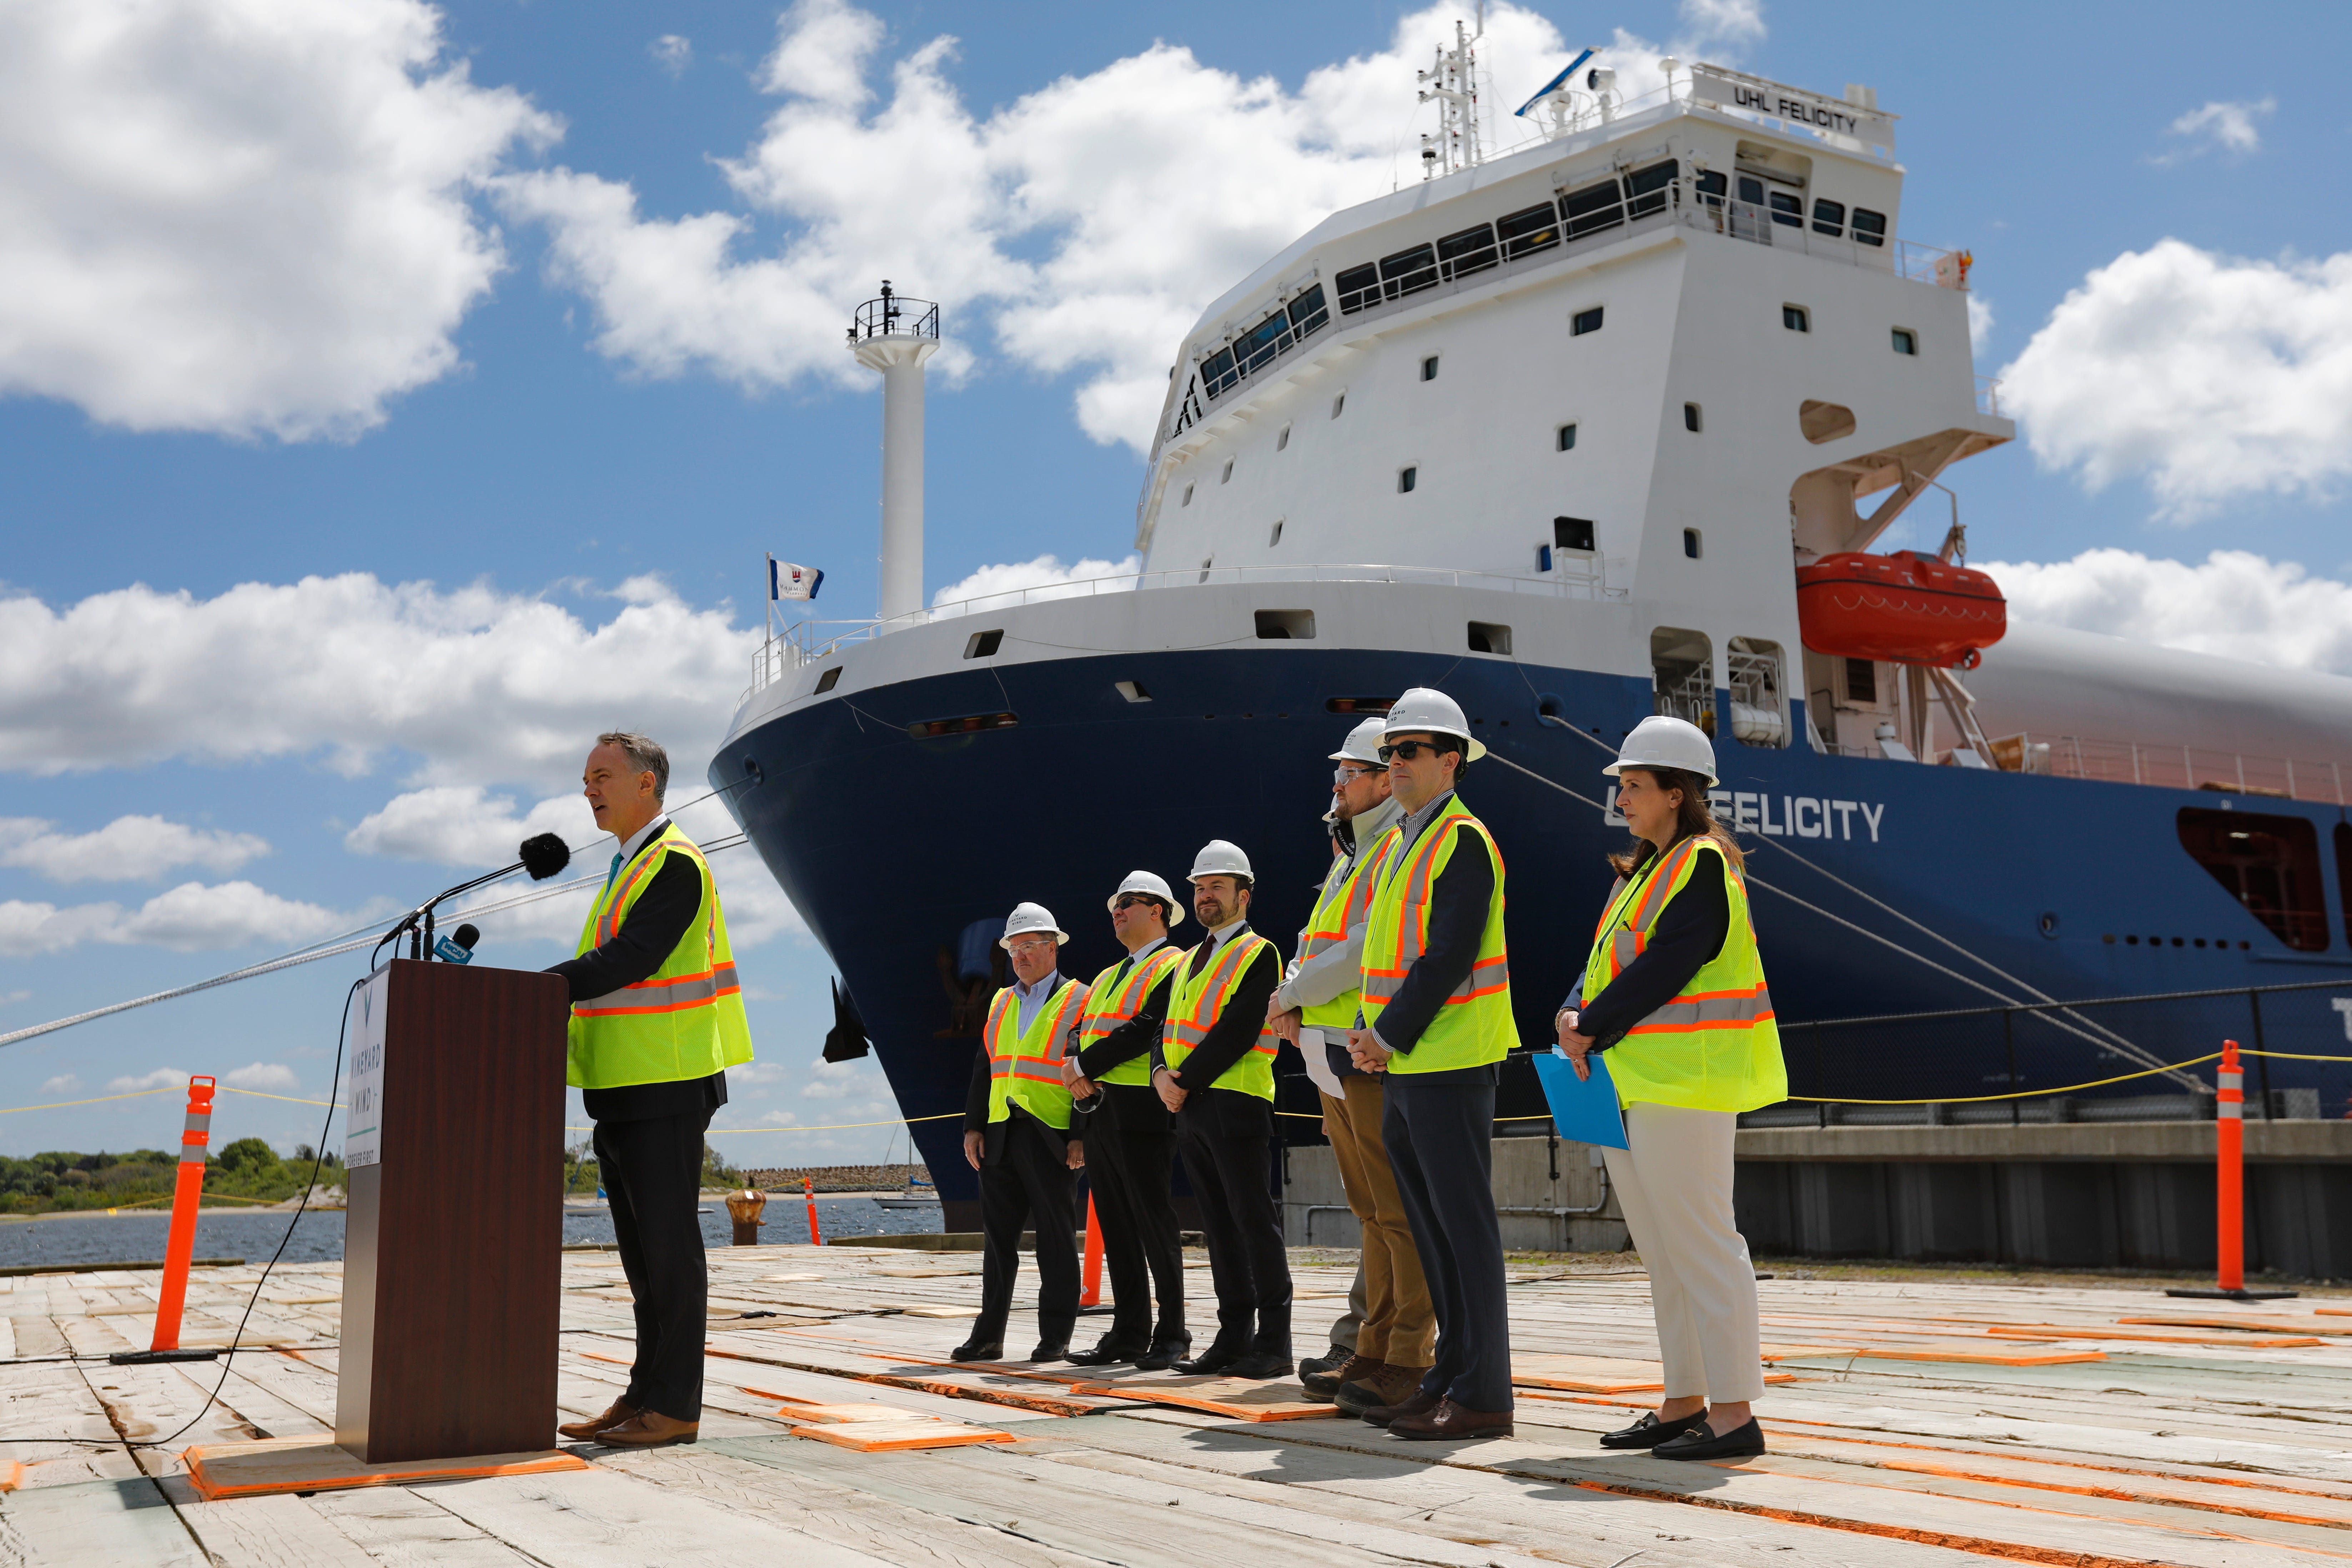 New Bedford mayor Jon Mitchell speaks at a press conference celebrating the first ship carrying turbine components for Vineyard Wind which arrived at the Marine Commerce Terminal in New Bedford.